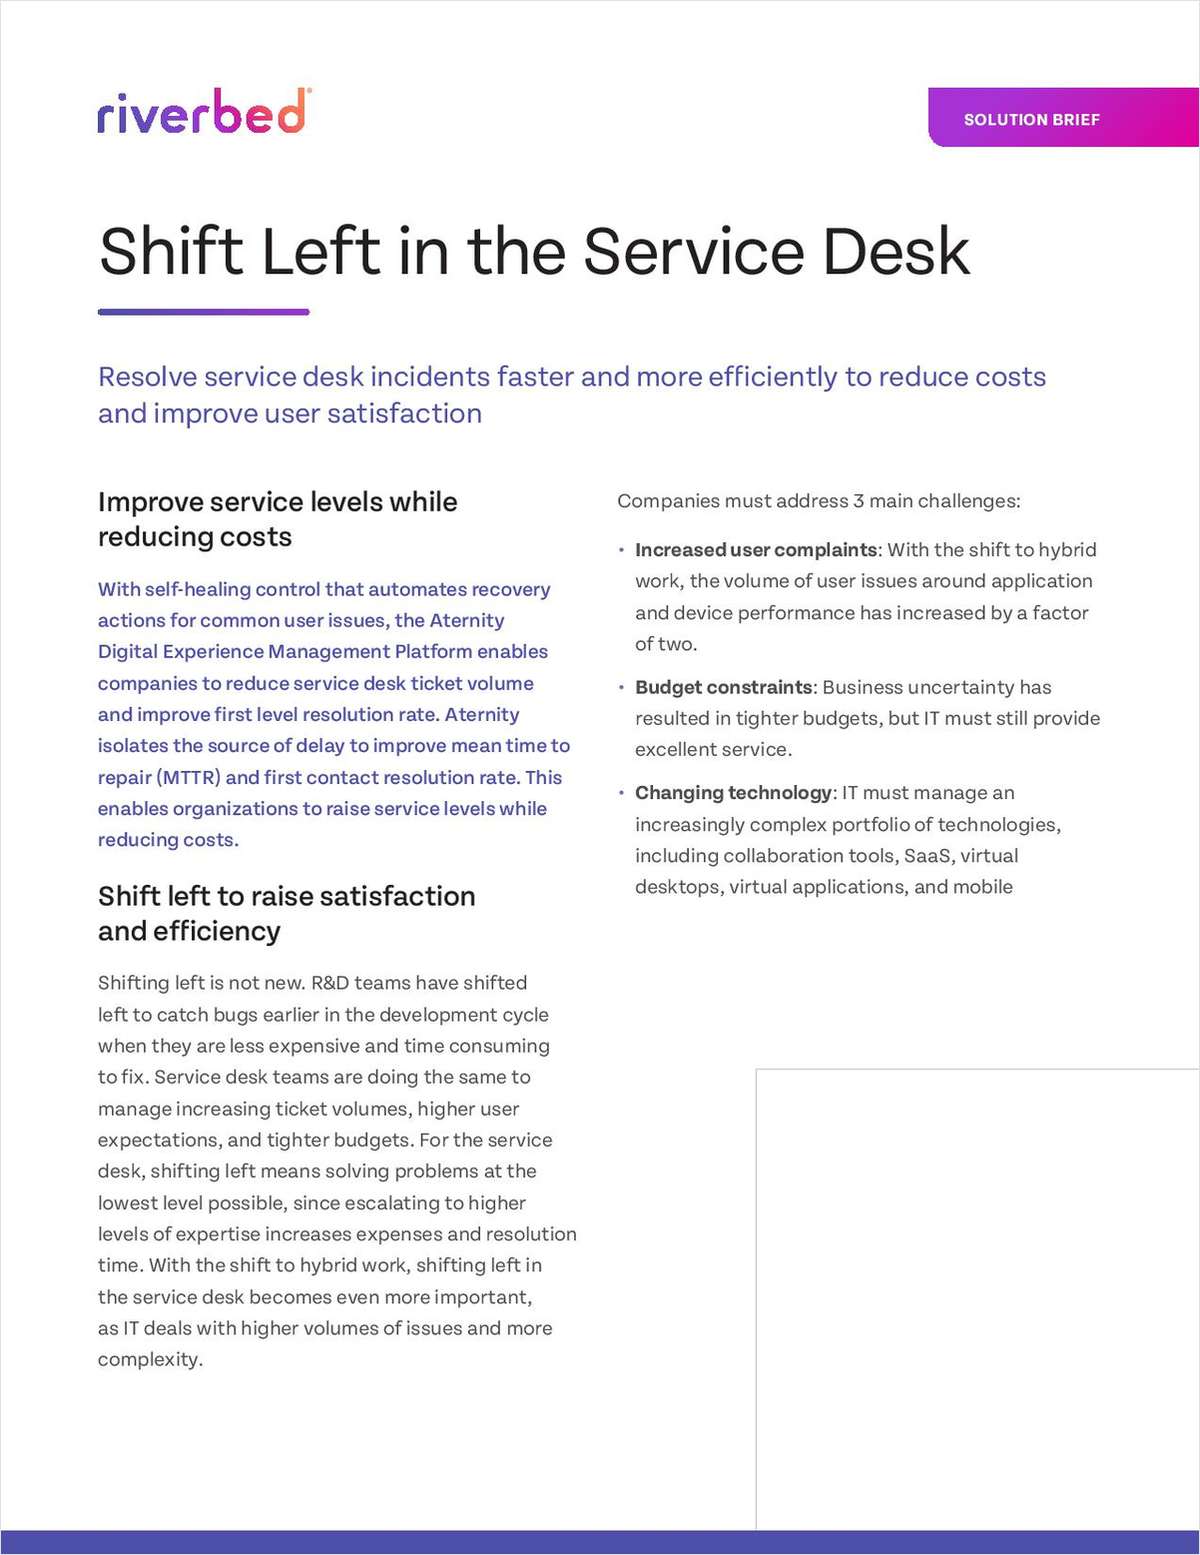 Shifting Left in the Service Desk